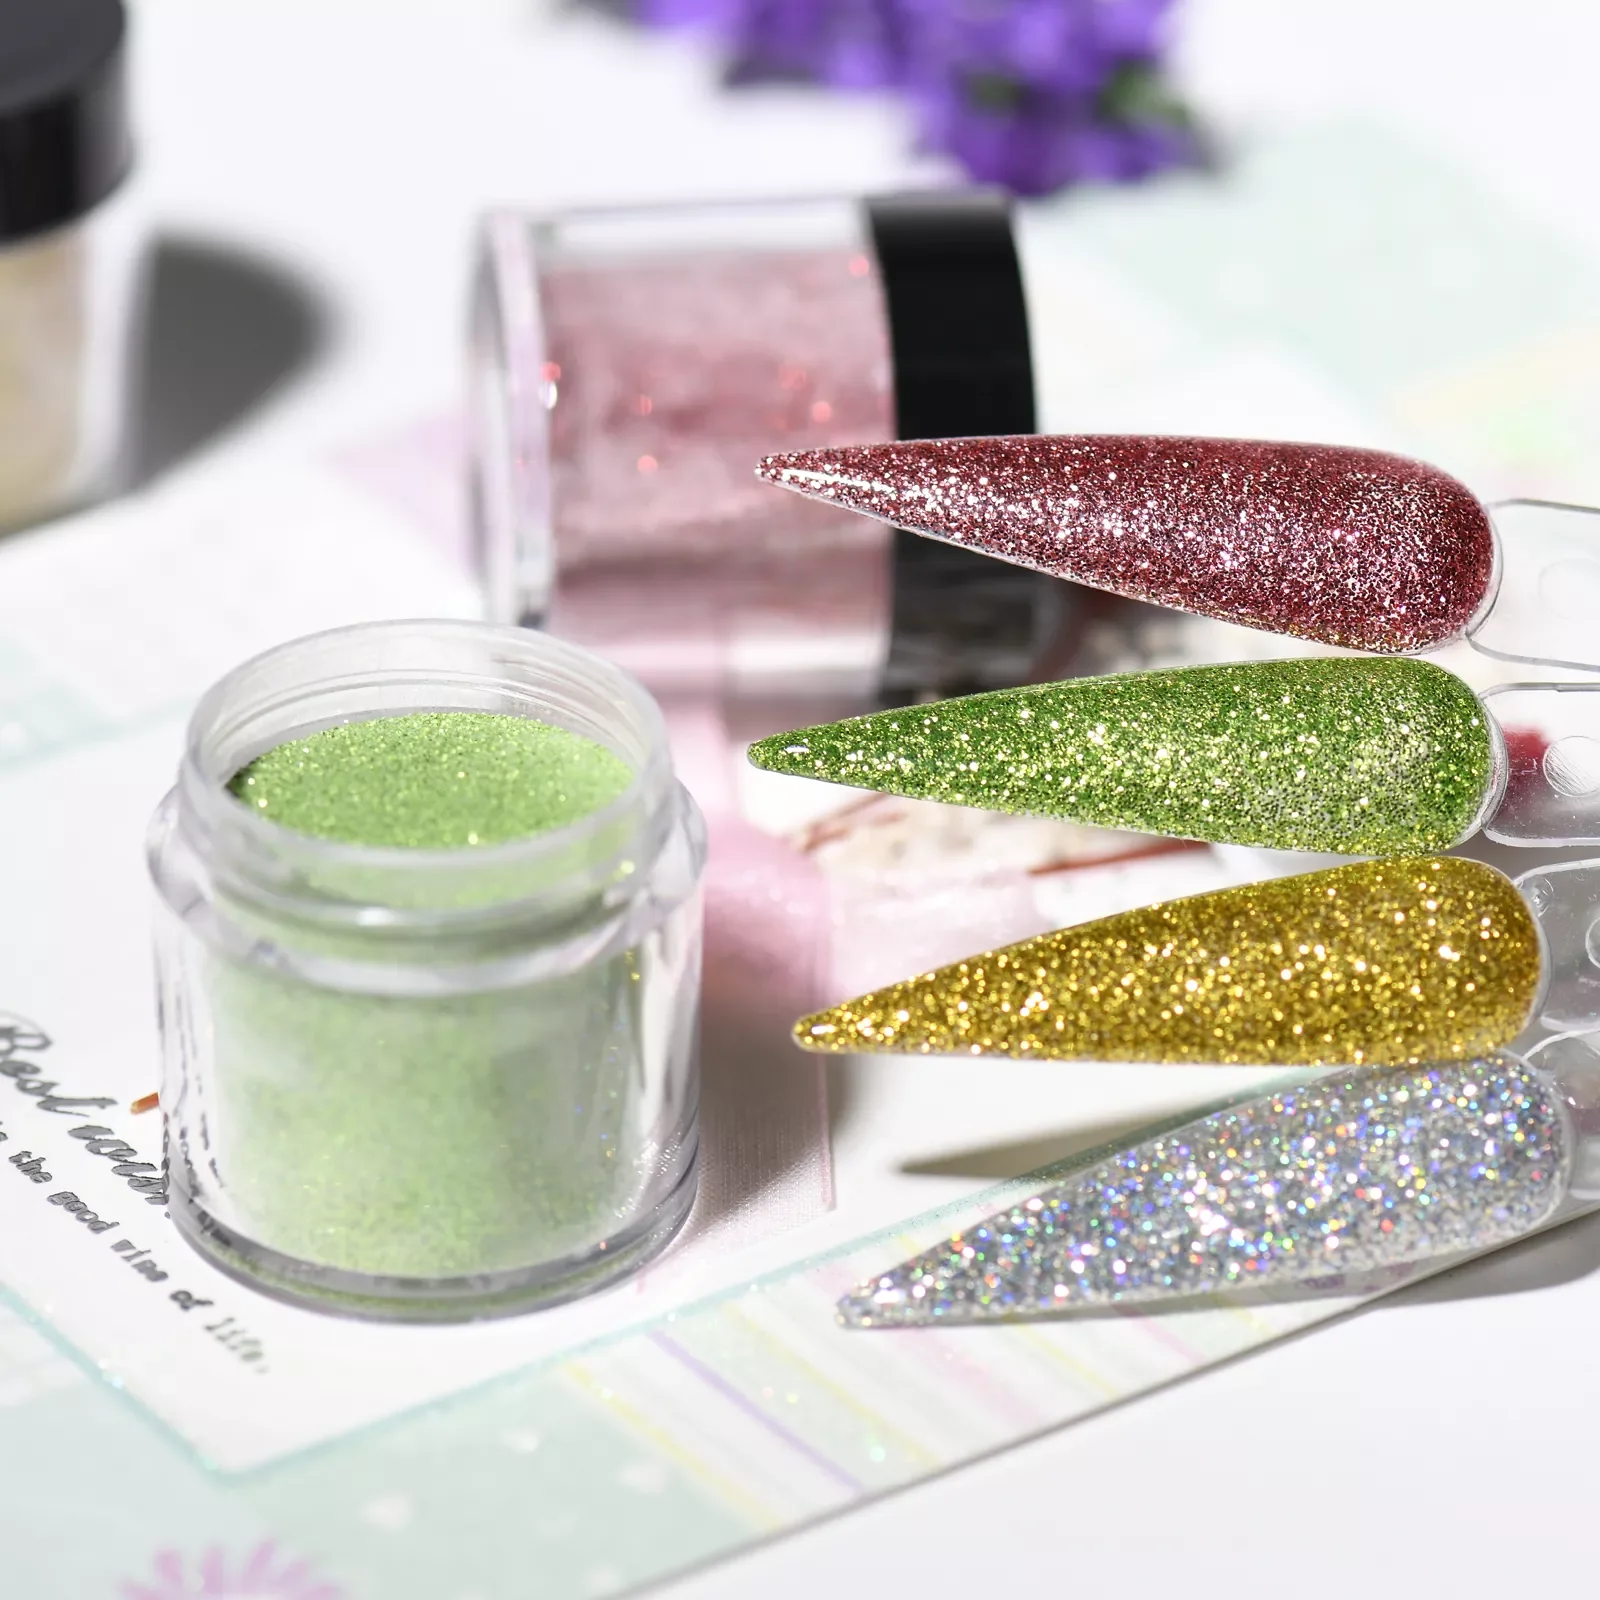 EMA Mixed-Glitter Dazzle Nail ACRYLIC POWDER Extension 180colors 1kg STICK MANICURE Colorful ART Nail ACRYLIC POWDER R4121-R4150